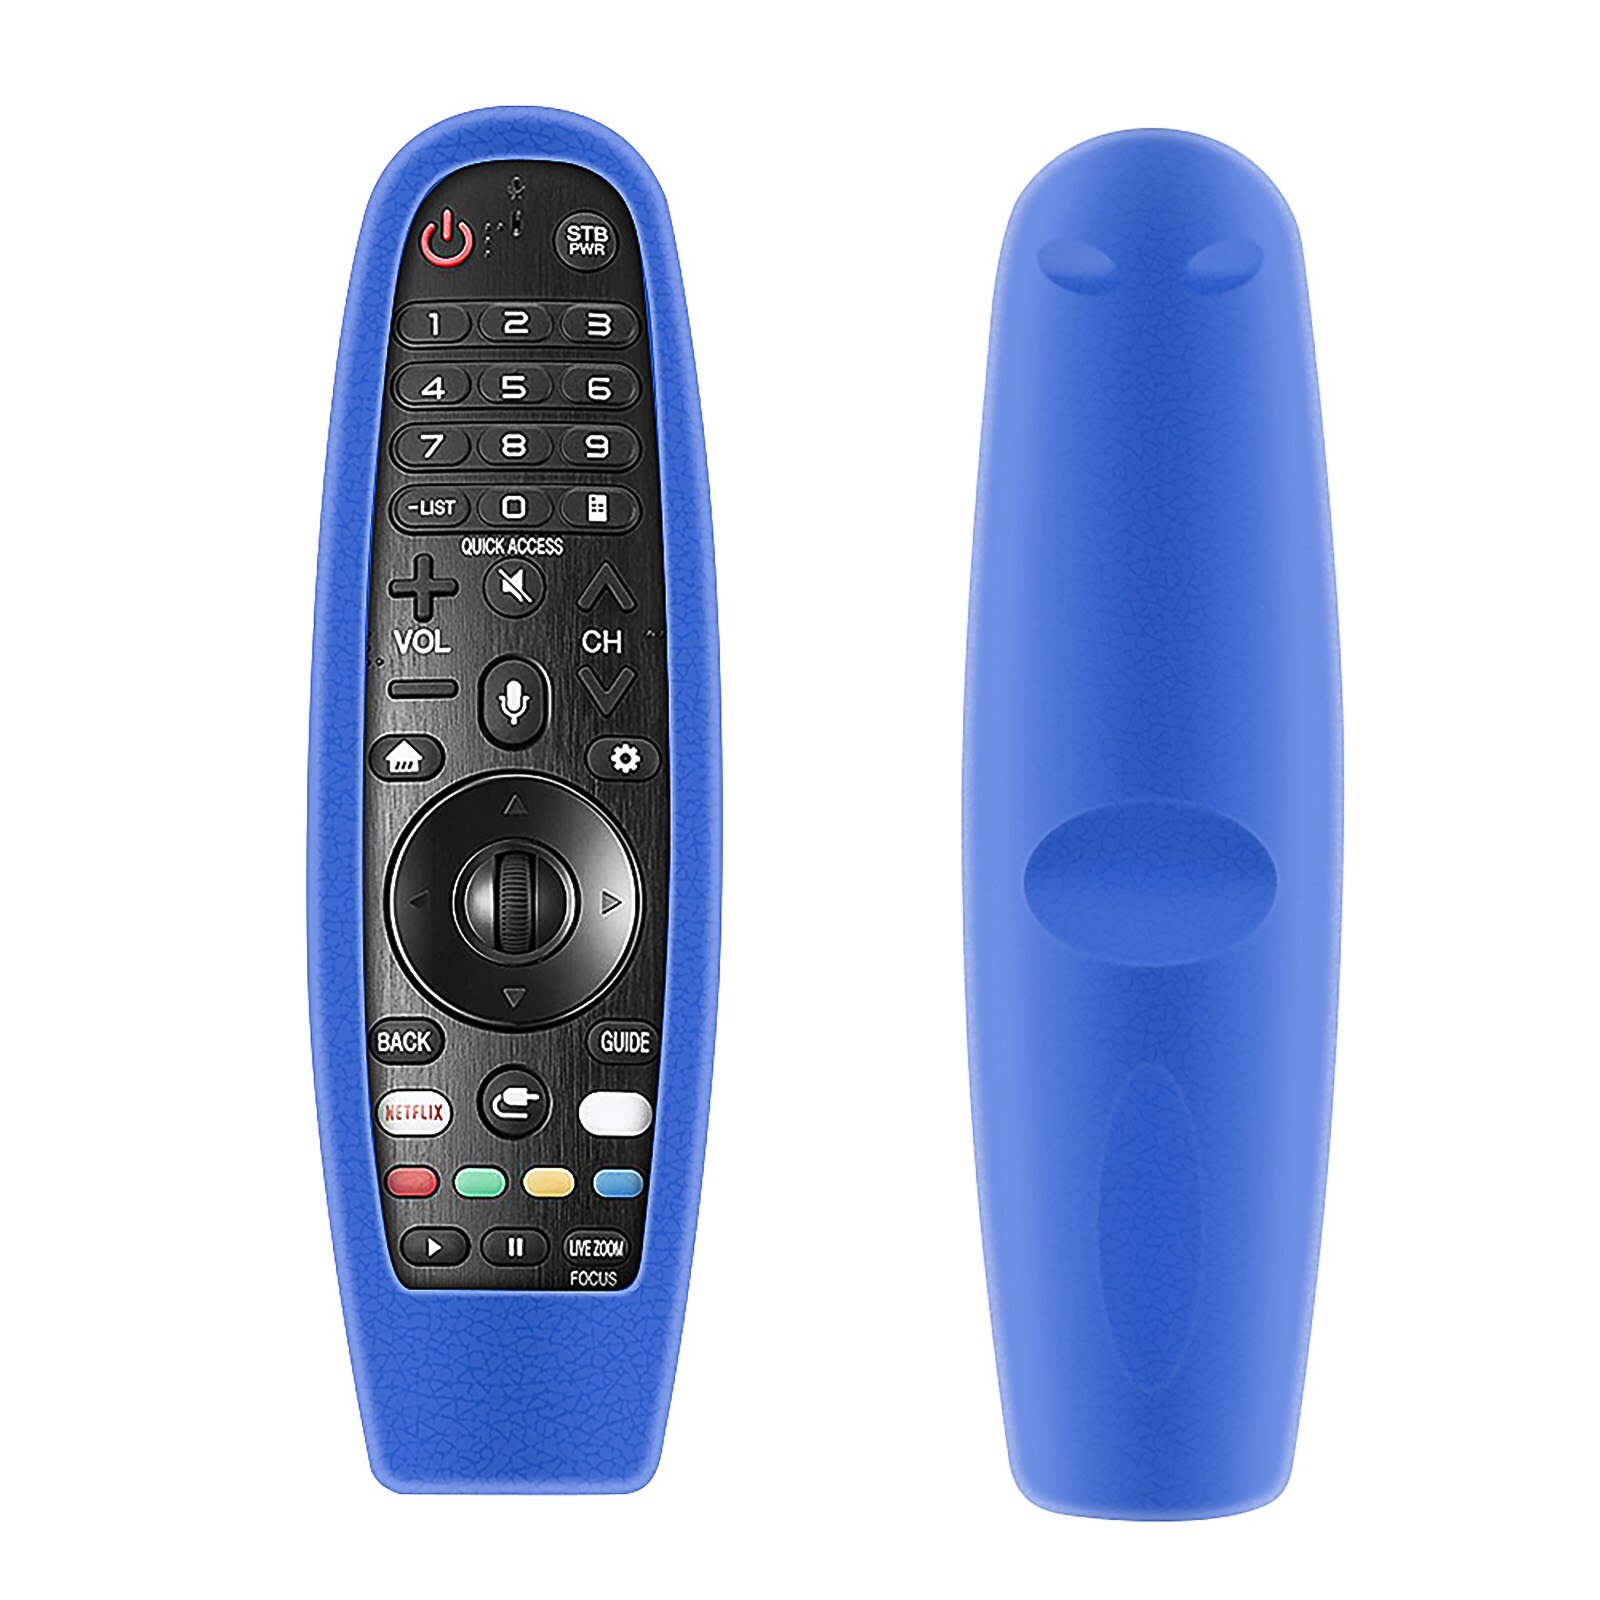 Protective Silicone Case For LG TV AN-MR600 650 AN-MR18BA MR19BA Magic Remote Control Cover Shockproof Washable Remote MR-18: Blue